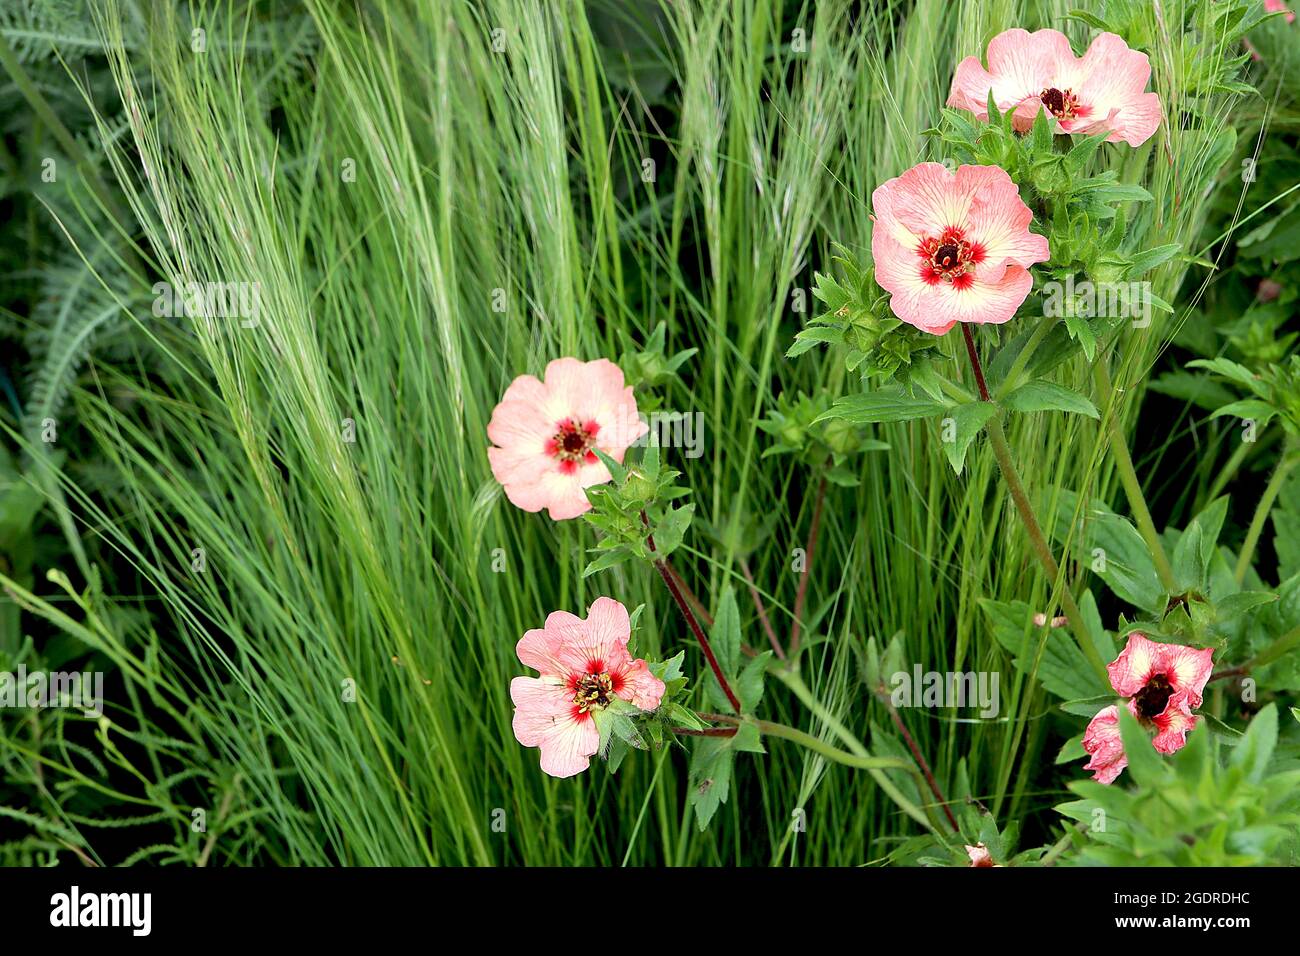 Potentilla x hopwoodiana Hopwood’s cinquefoil – dusky pink veined flowers with cream blotches, circular red basal marks and brown centre,  July, UK Stock Photo